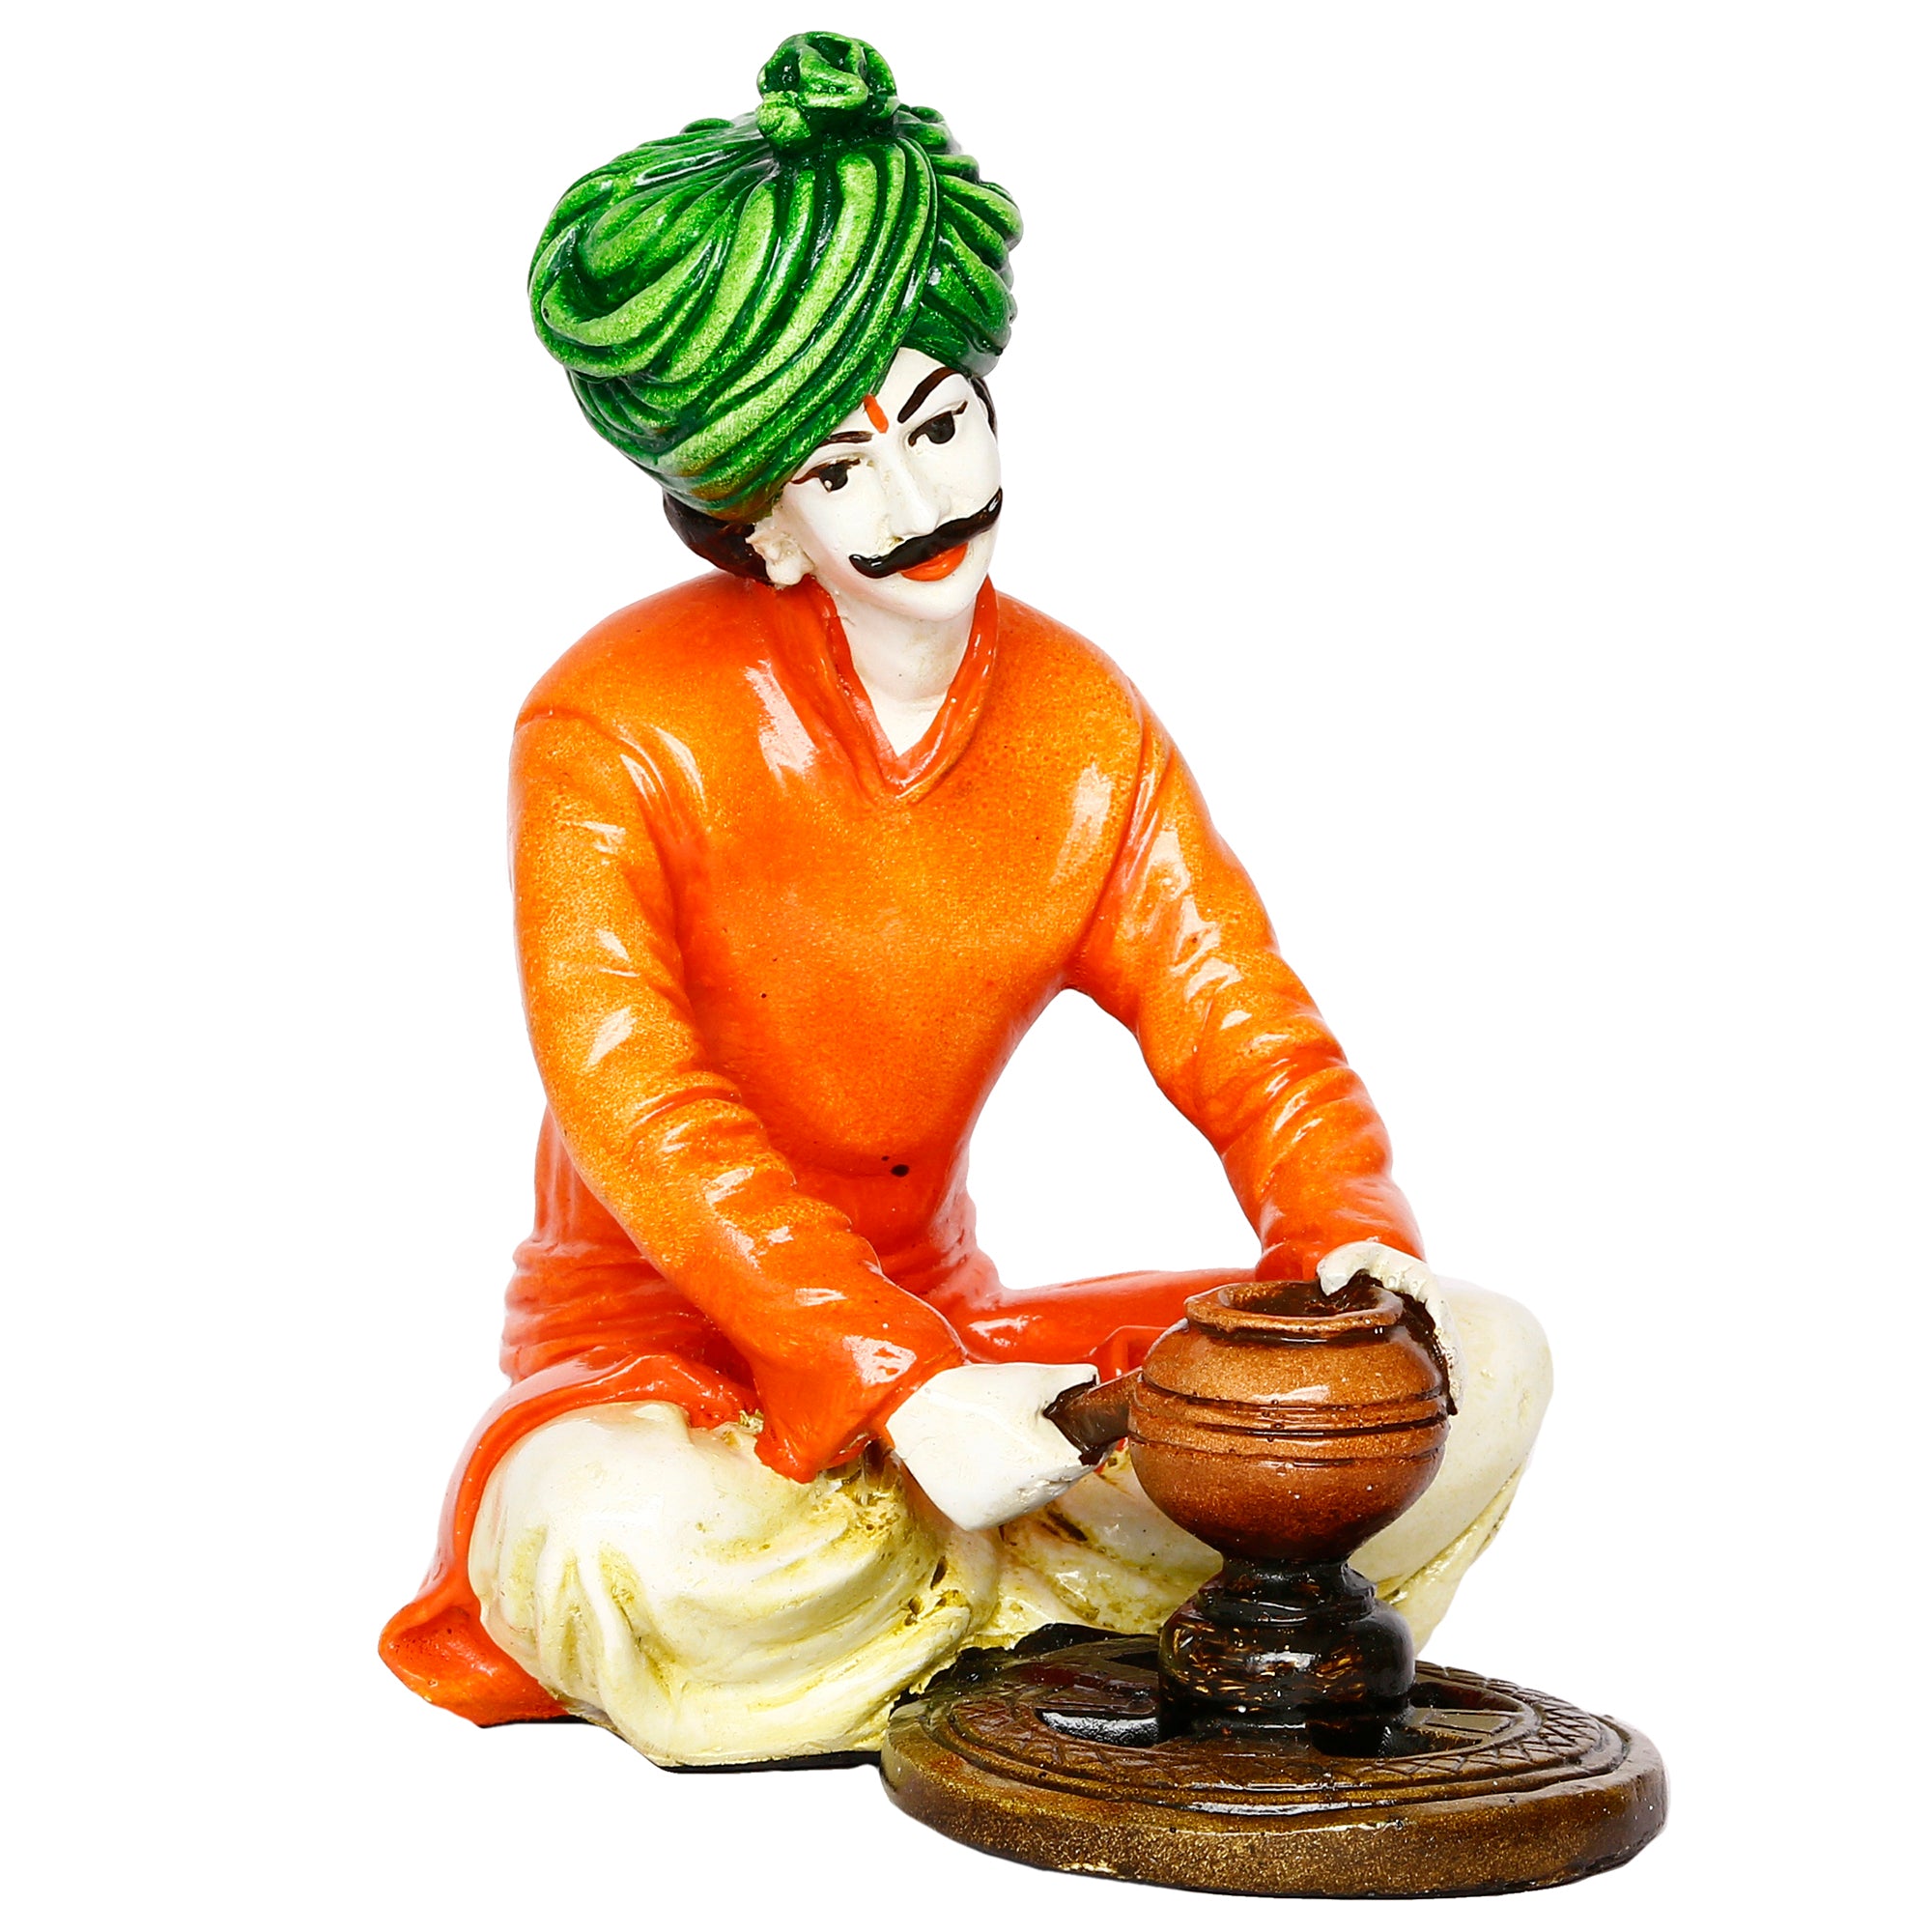 Colorful Rajasthani Man Making Pot Handcrafted Decorative Polyresin Showpiece 5